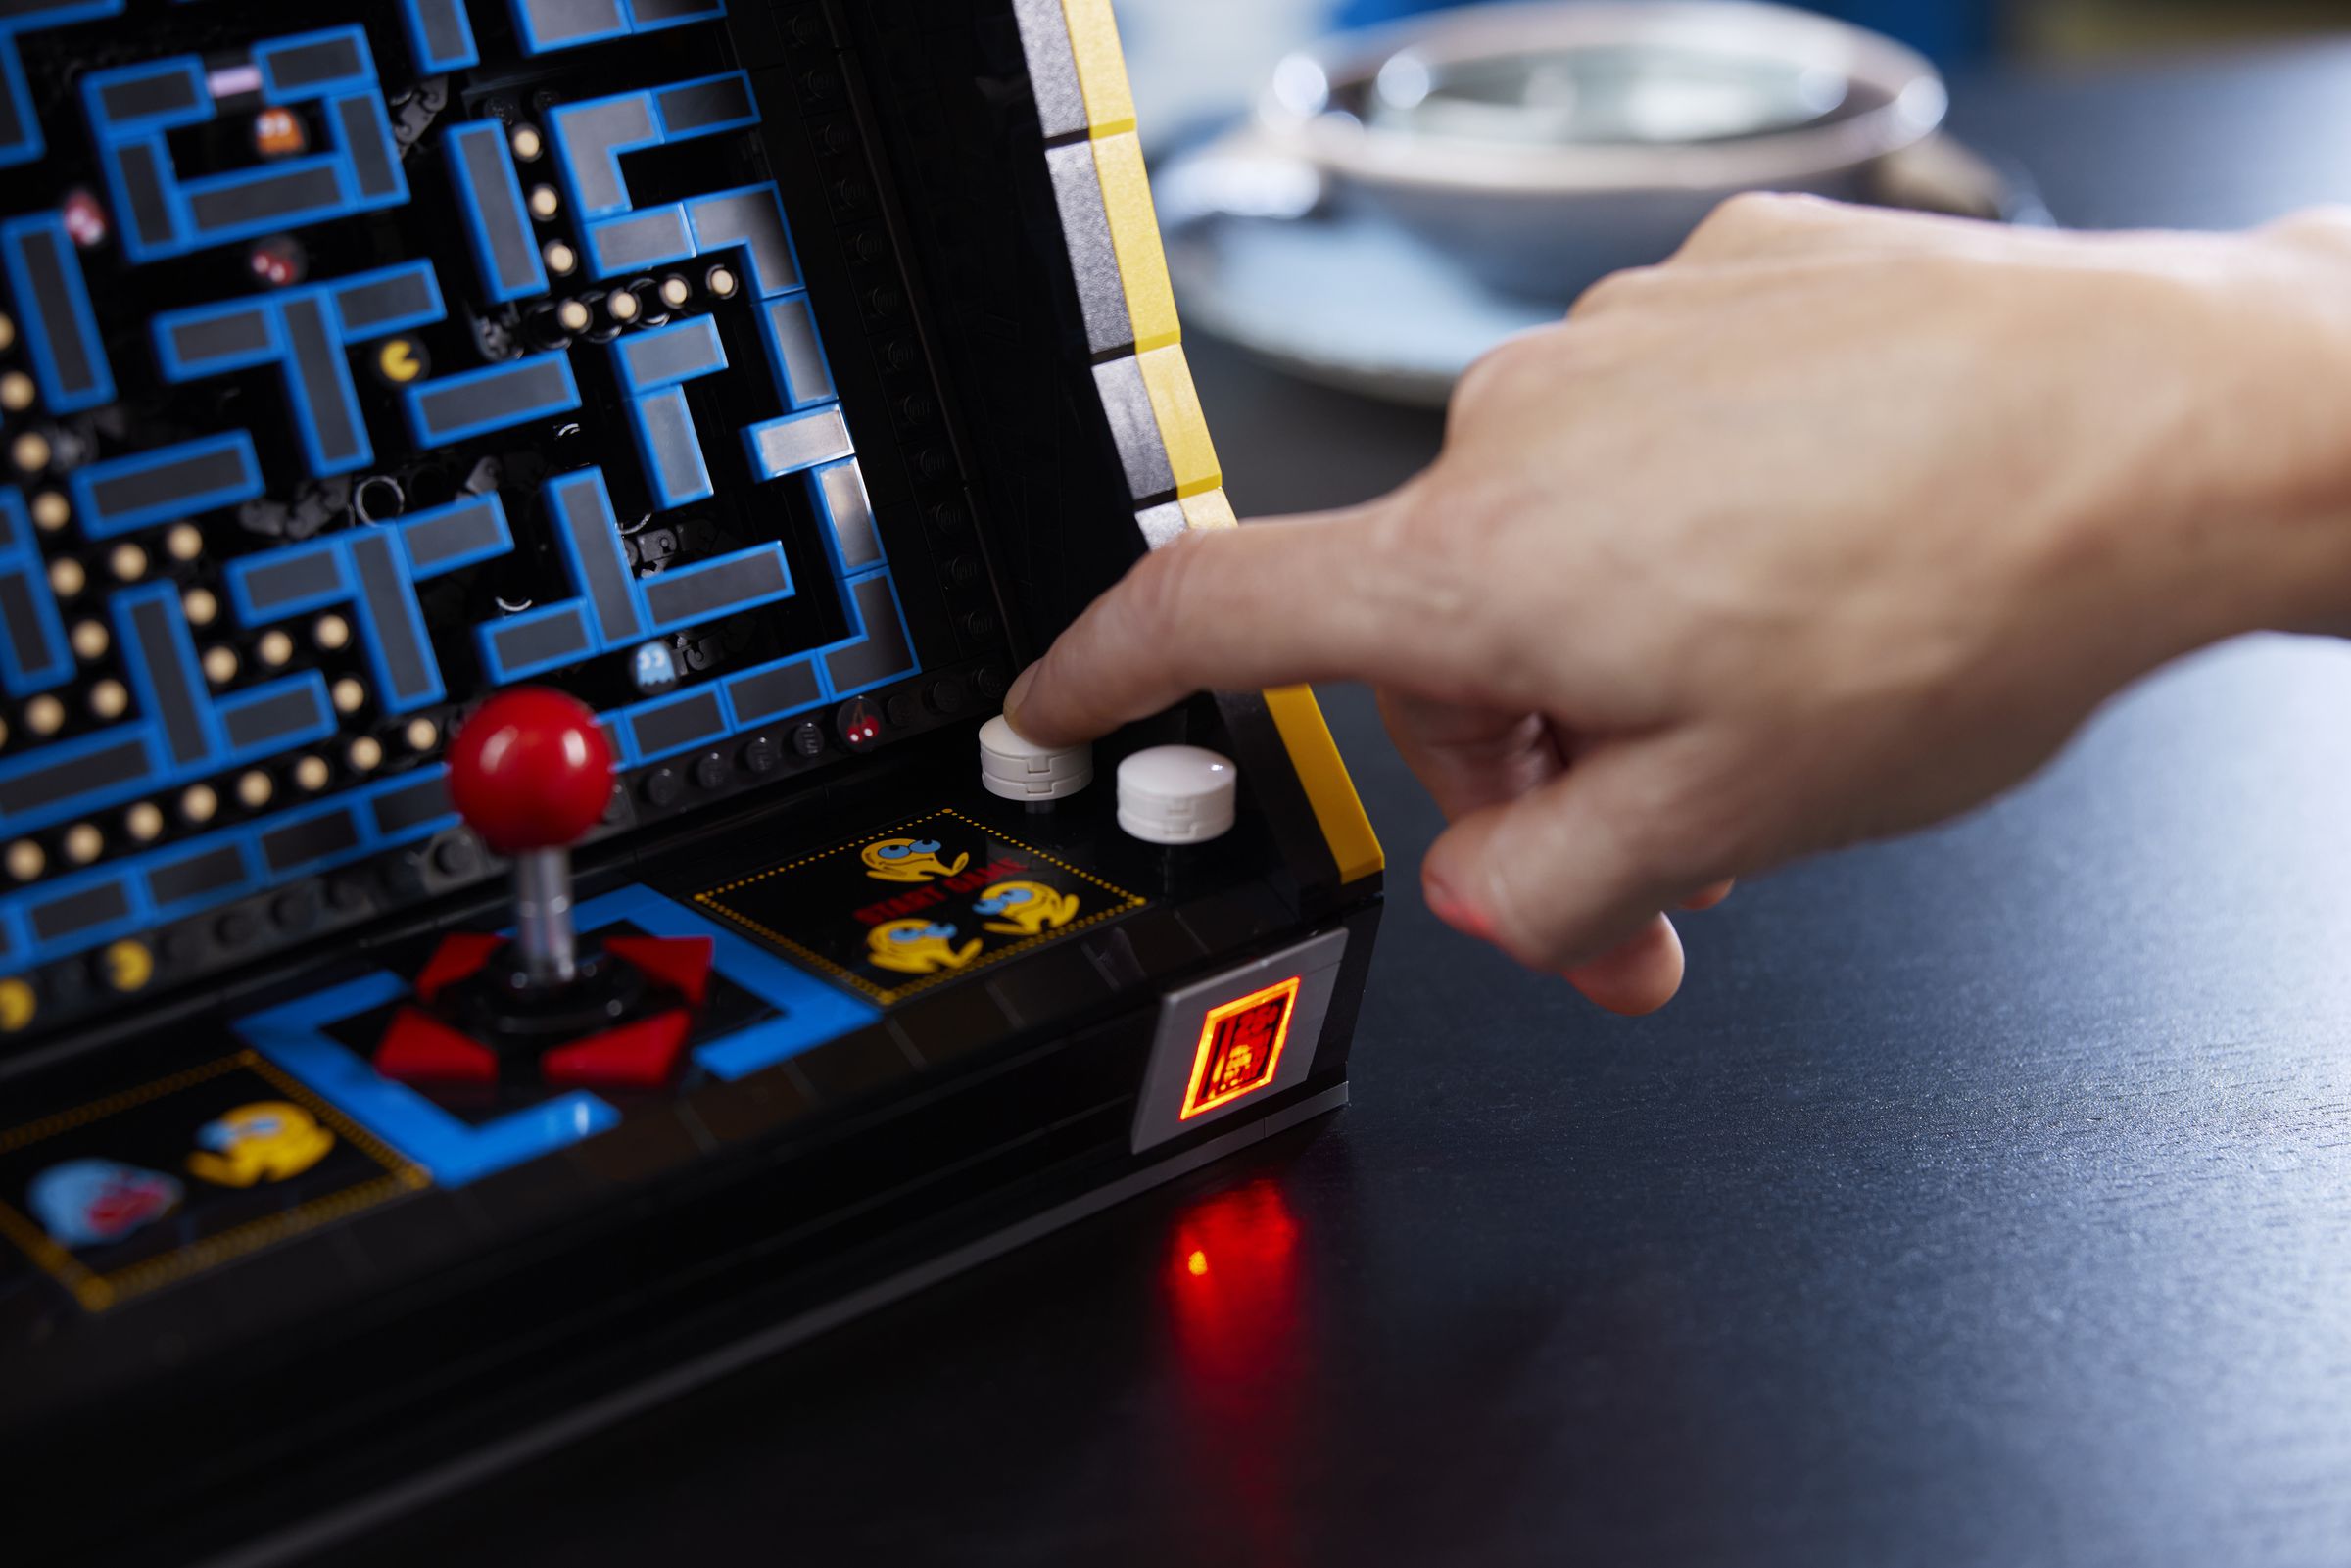 A person presses a button on the arcade cabinet, causing its coin-slot to light up.